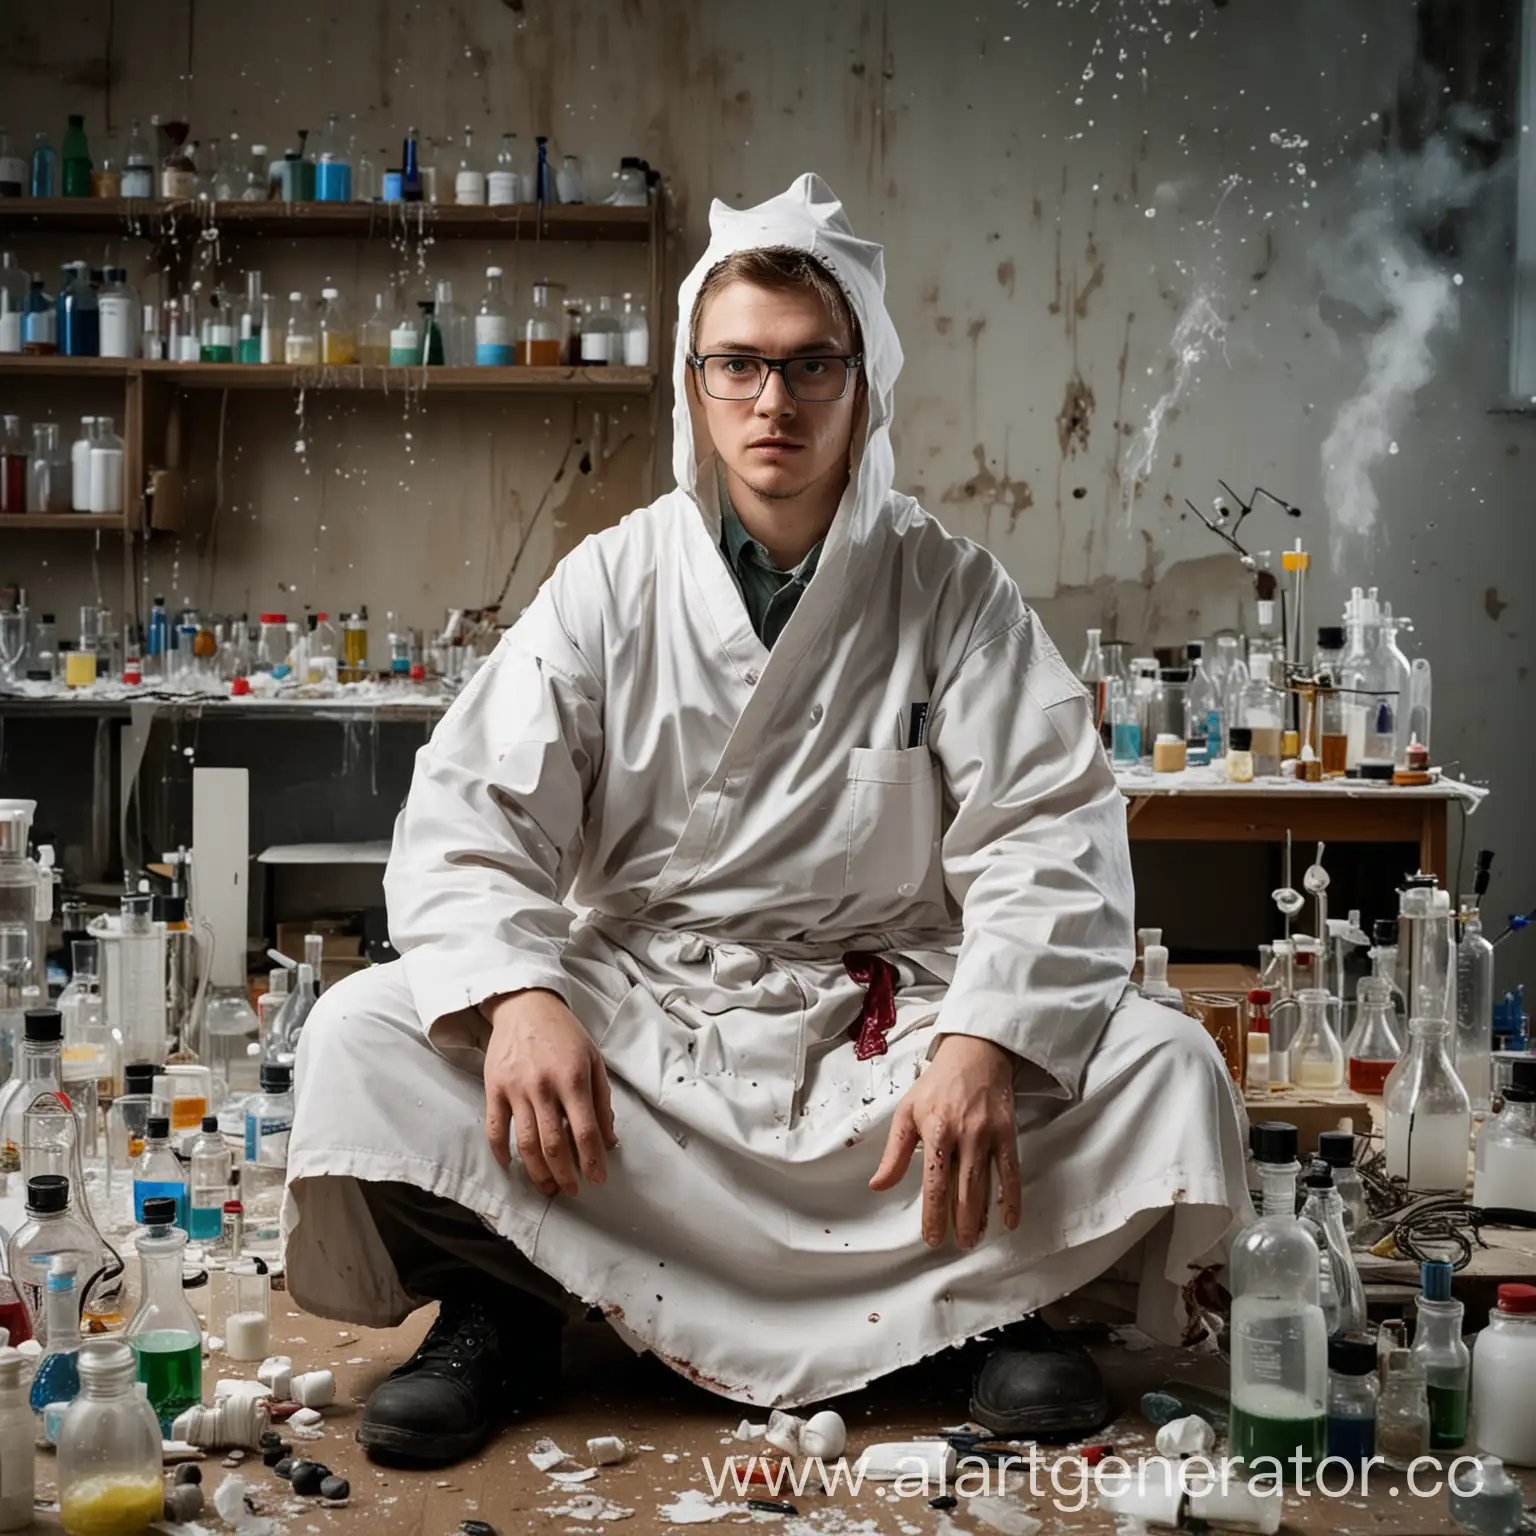 Chaos-in-Biochemical-Laboratory-Laboratory-Assistant-Amidst-Exploded-Reagents